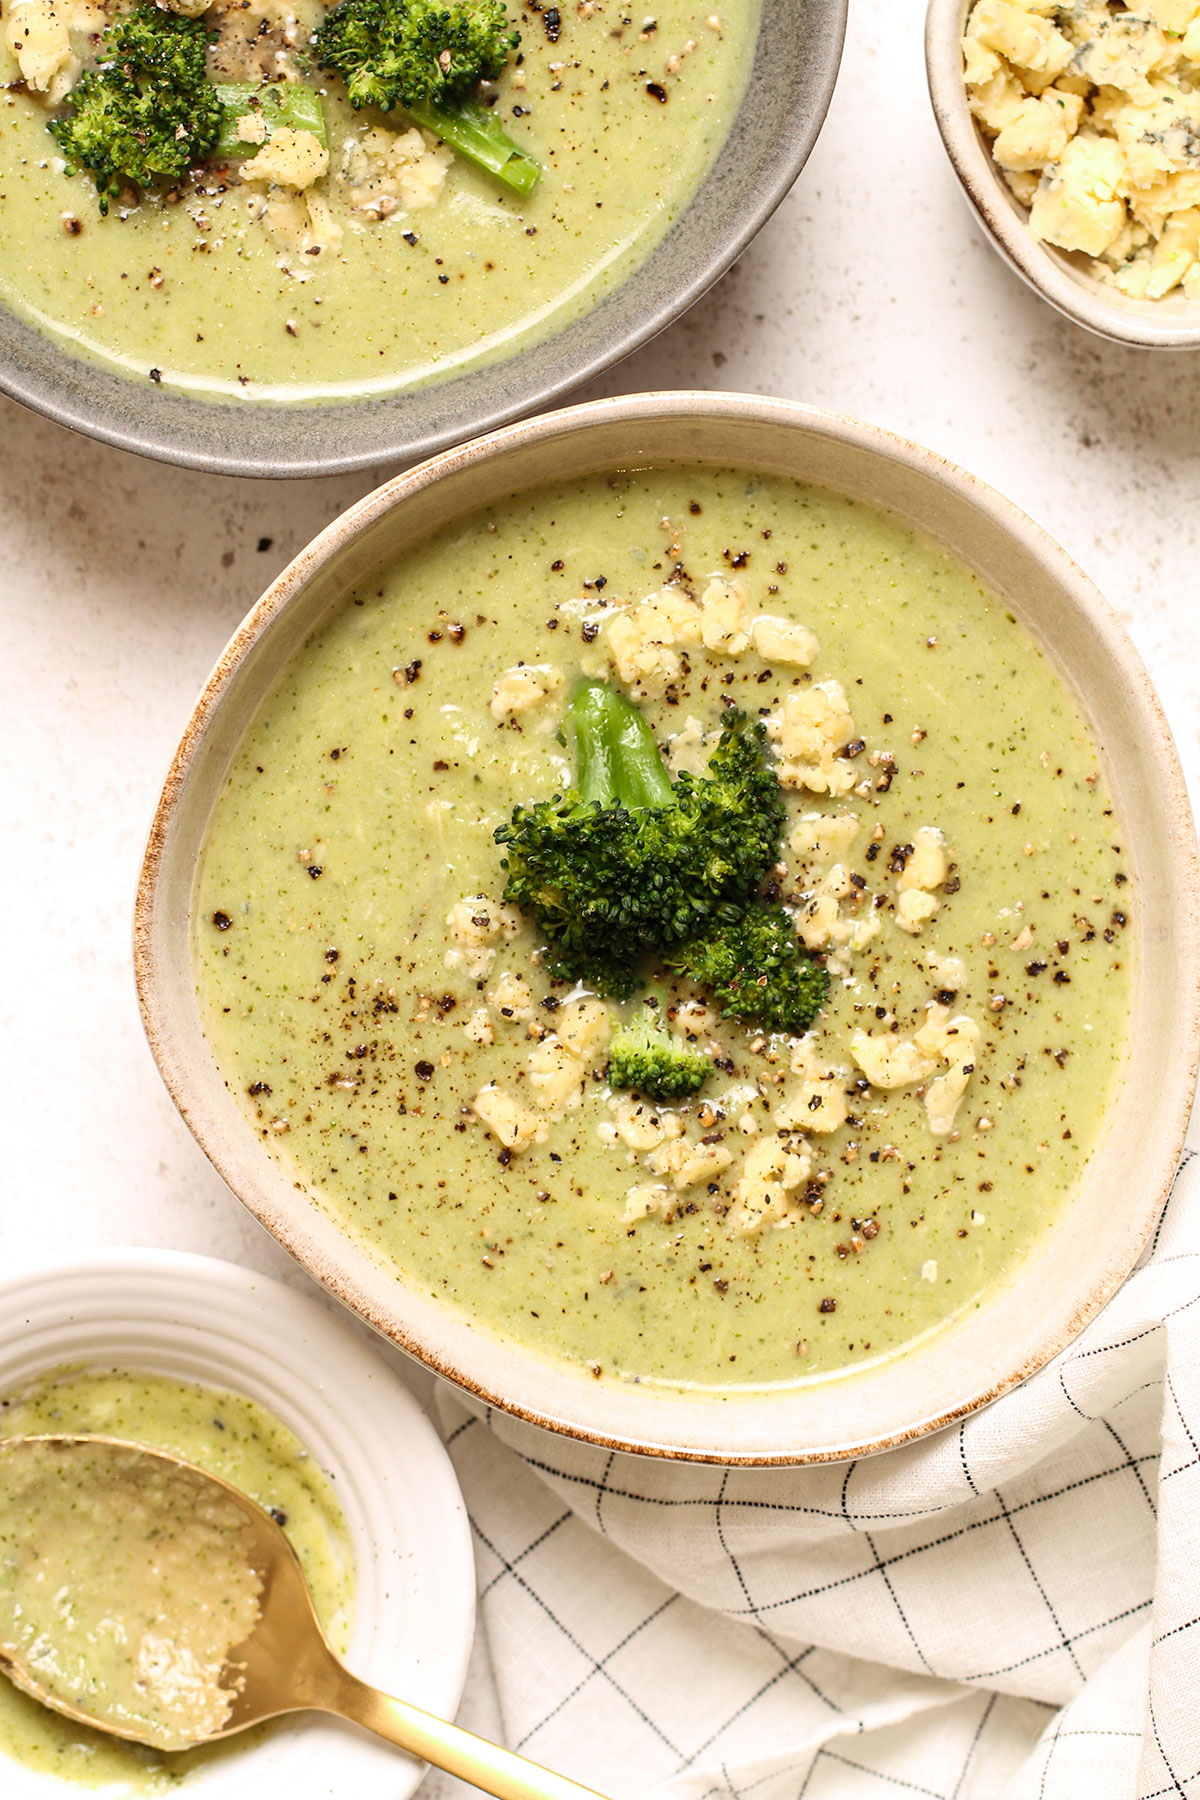 Two bowls of broccoli and stilton soup with a bowl of crumbled stilton for topping.